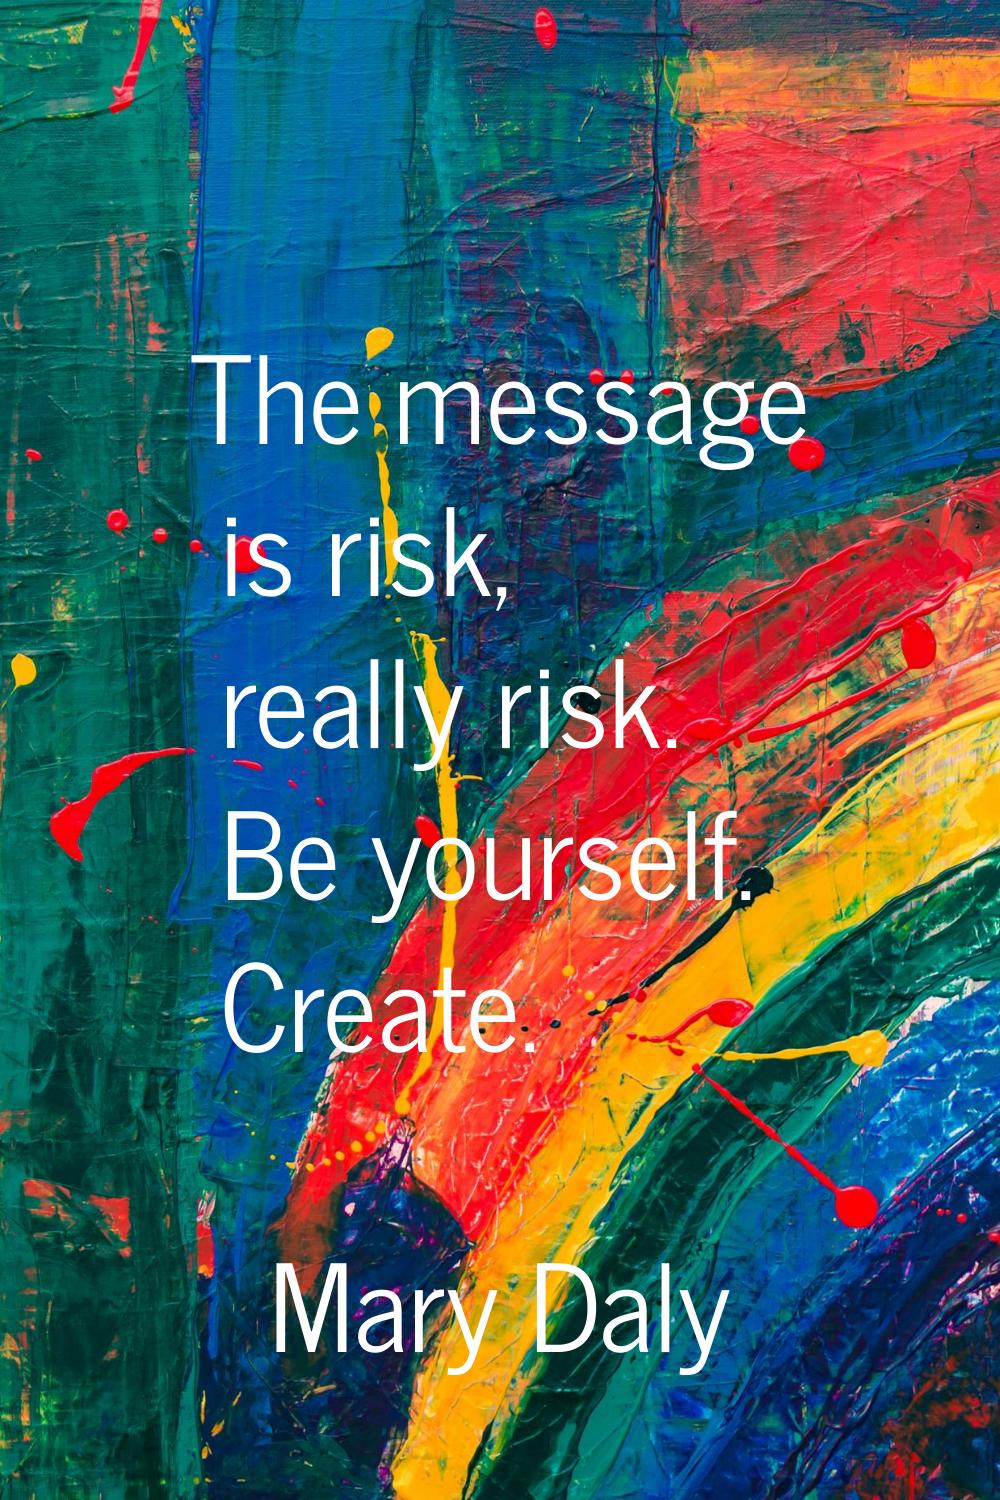 The message is risk, really risk. Be yourself. Create.